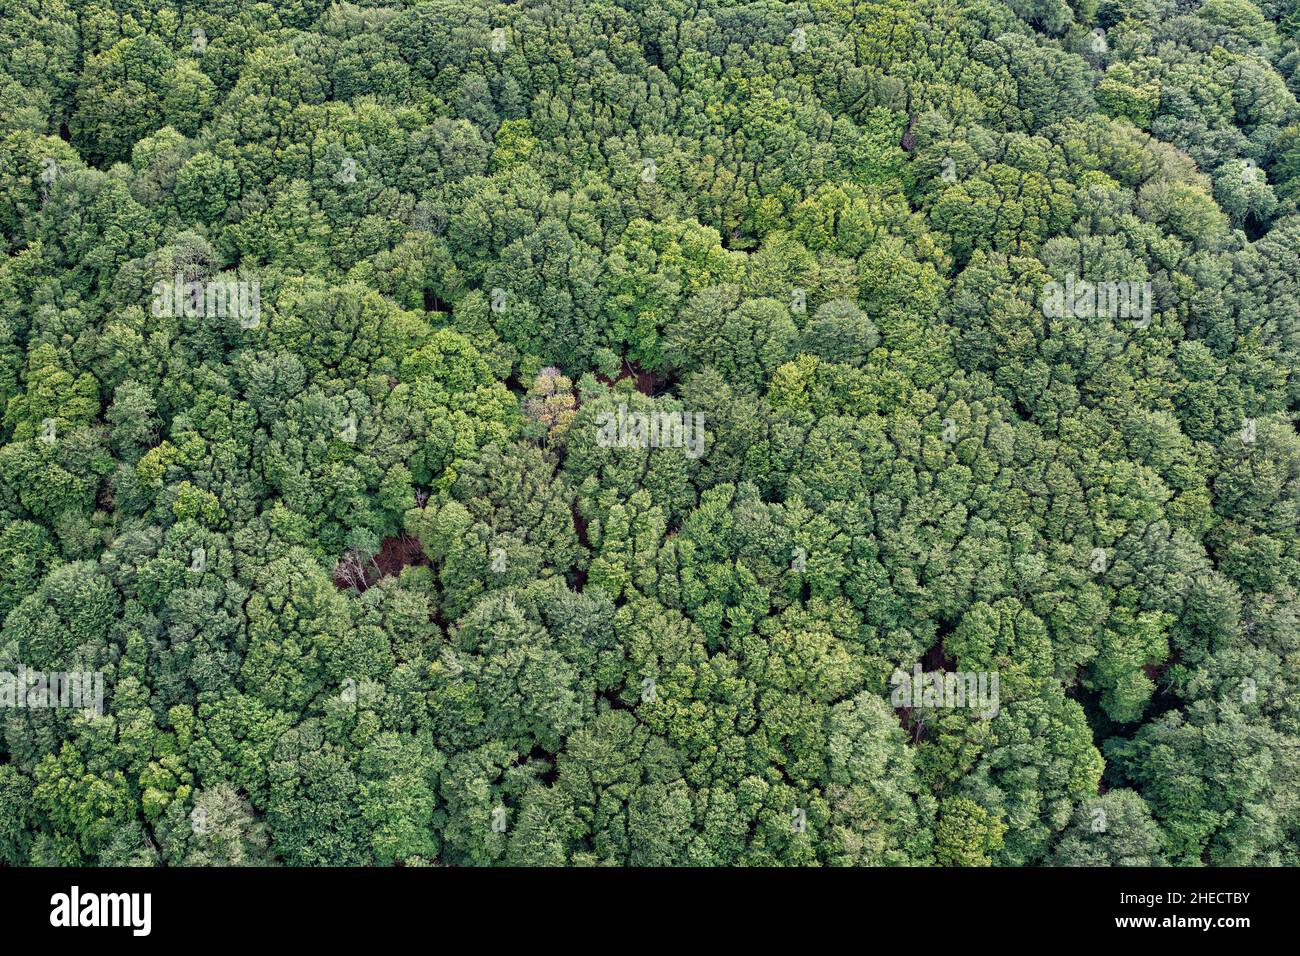 France, Puy de Dome, the Regional Natural Park of the Volcanoes of Auvergne, Chaine des Puys, Orcines, the summit of the Grand Sarcoui volcano, forest of Grand-Sarcoui, the Crown shyness, the canopy shyness, phenomenon of allelopathy (aerial view) Stock Photo